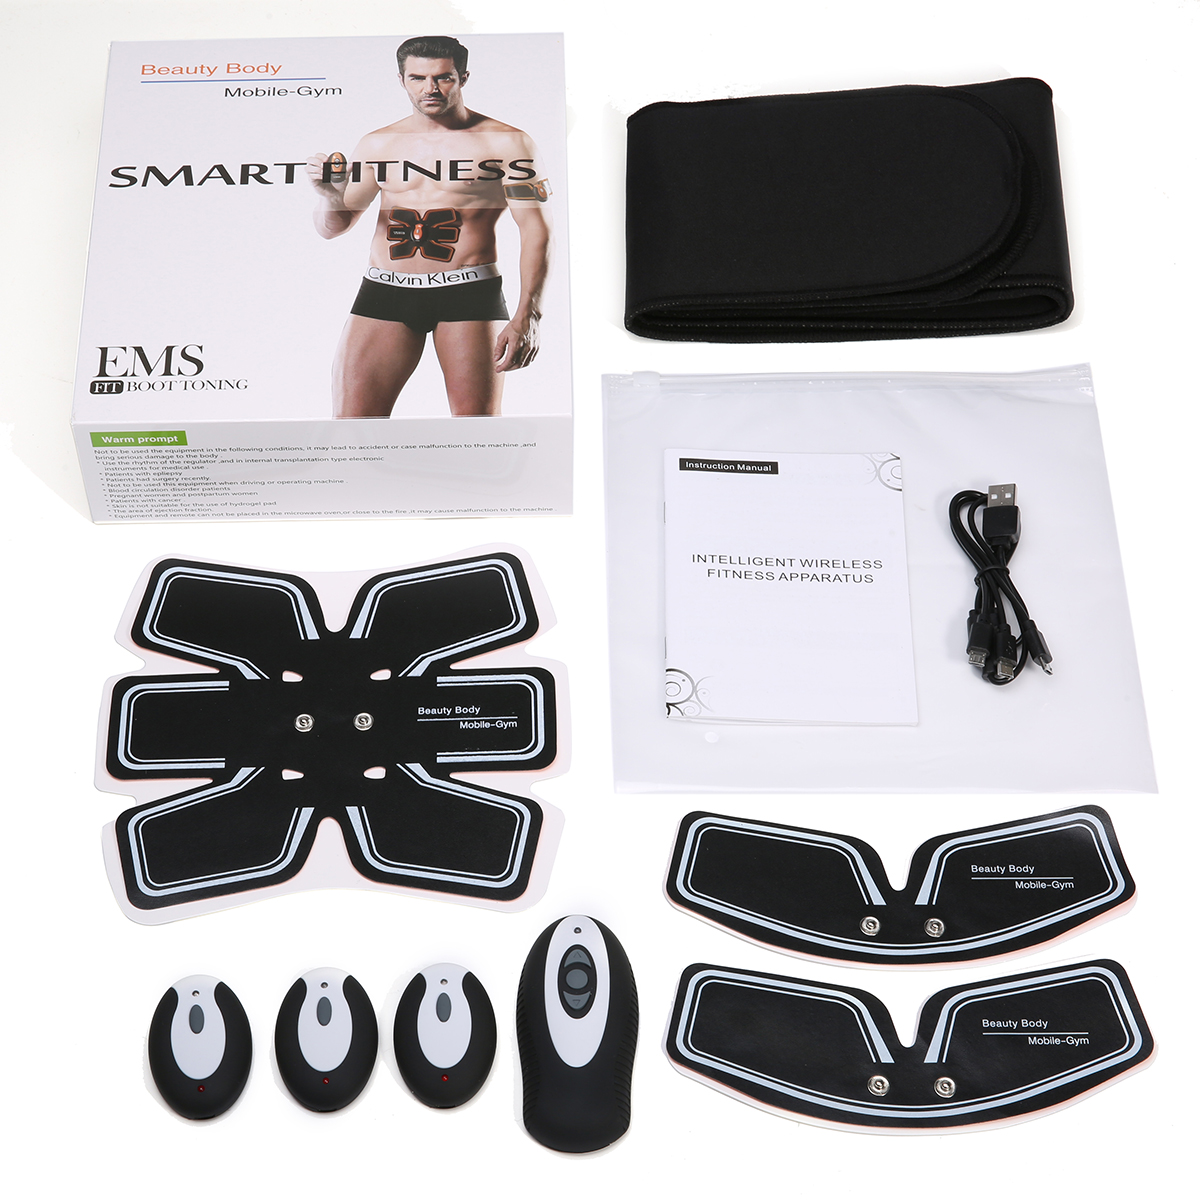 CHARMINER-Smart-Toner-Abdominal-Toning-Muscle-Abs-Massager-Home--Gym-Body-Trainer-Fitness-Equipment-1891580-9